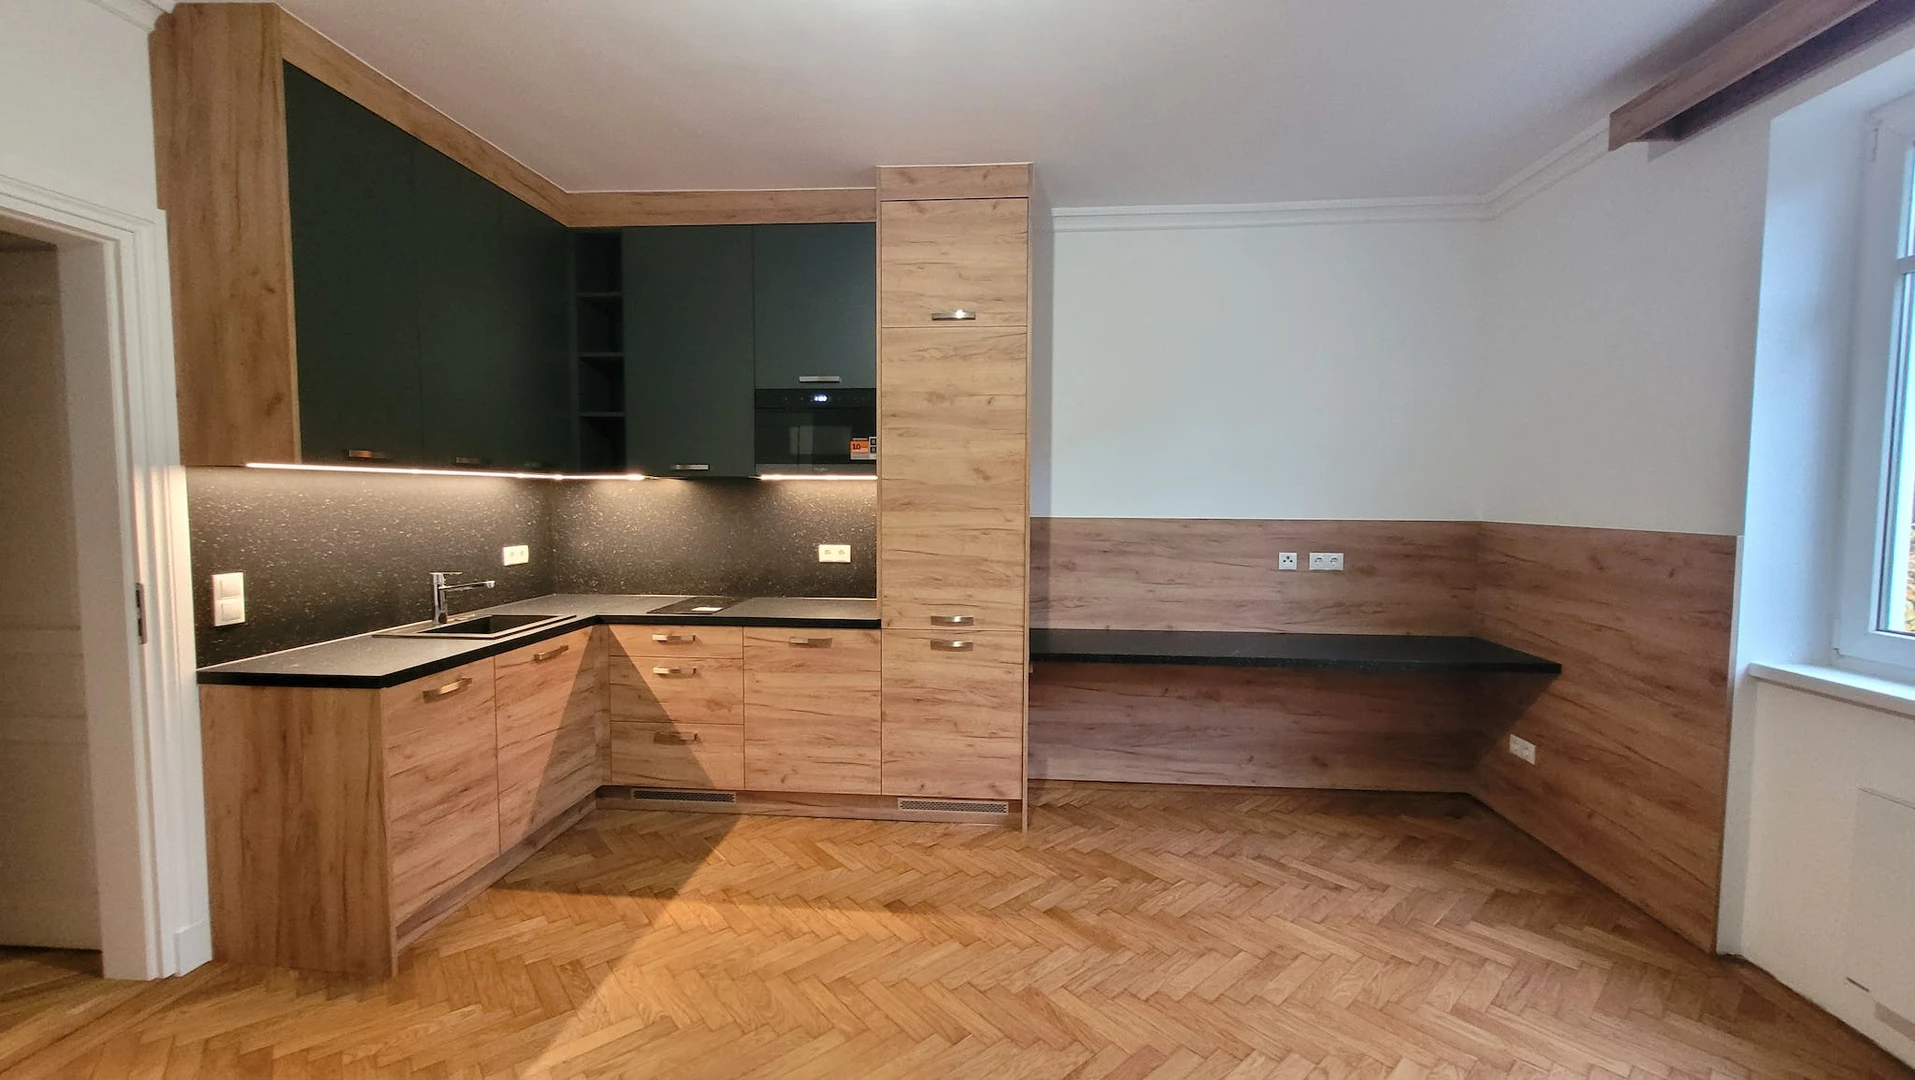 Accommodation with 3 bedrooms in wien